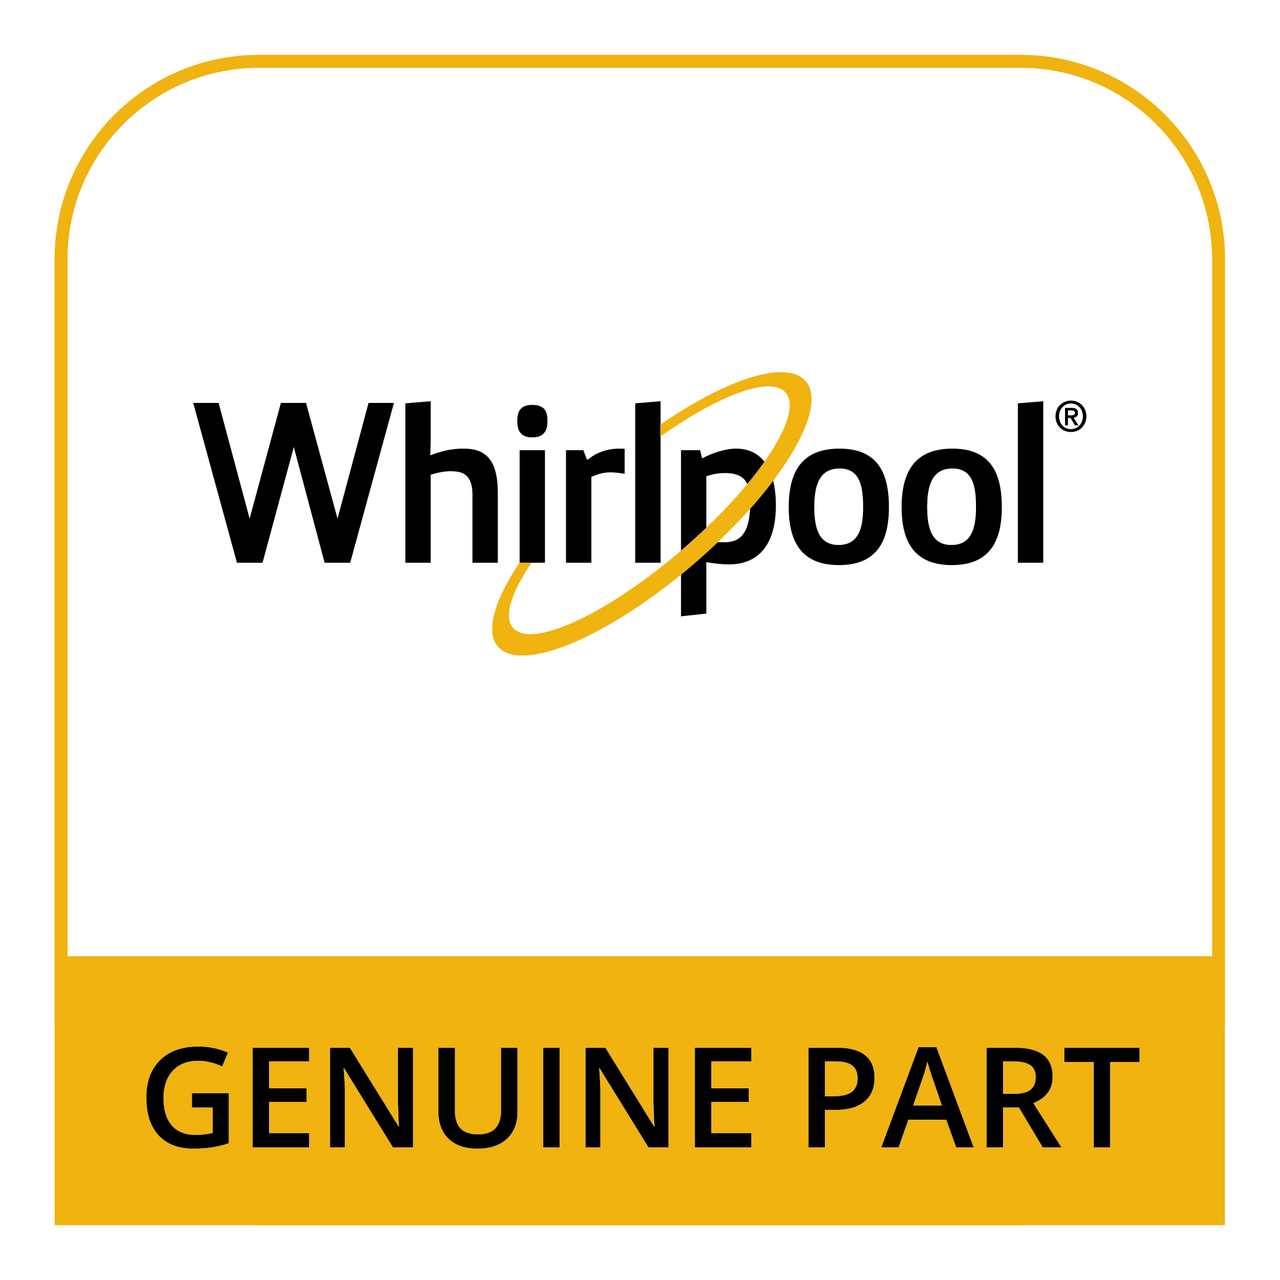 Whirlpool WFR800418 - 220 Lint T *Non-Wise* - Genuine Part